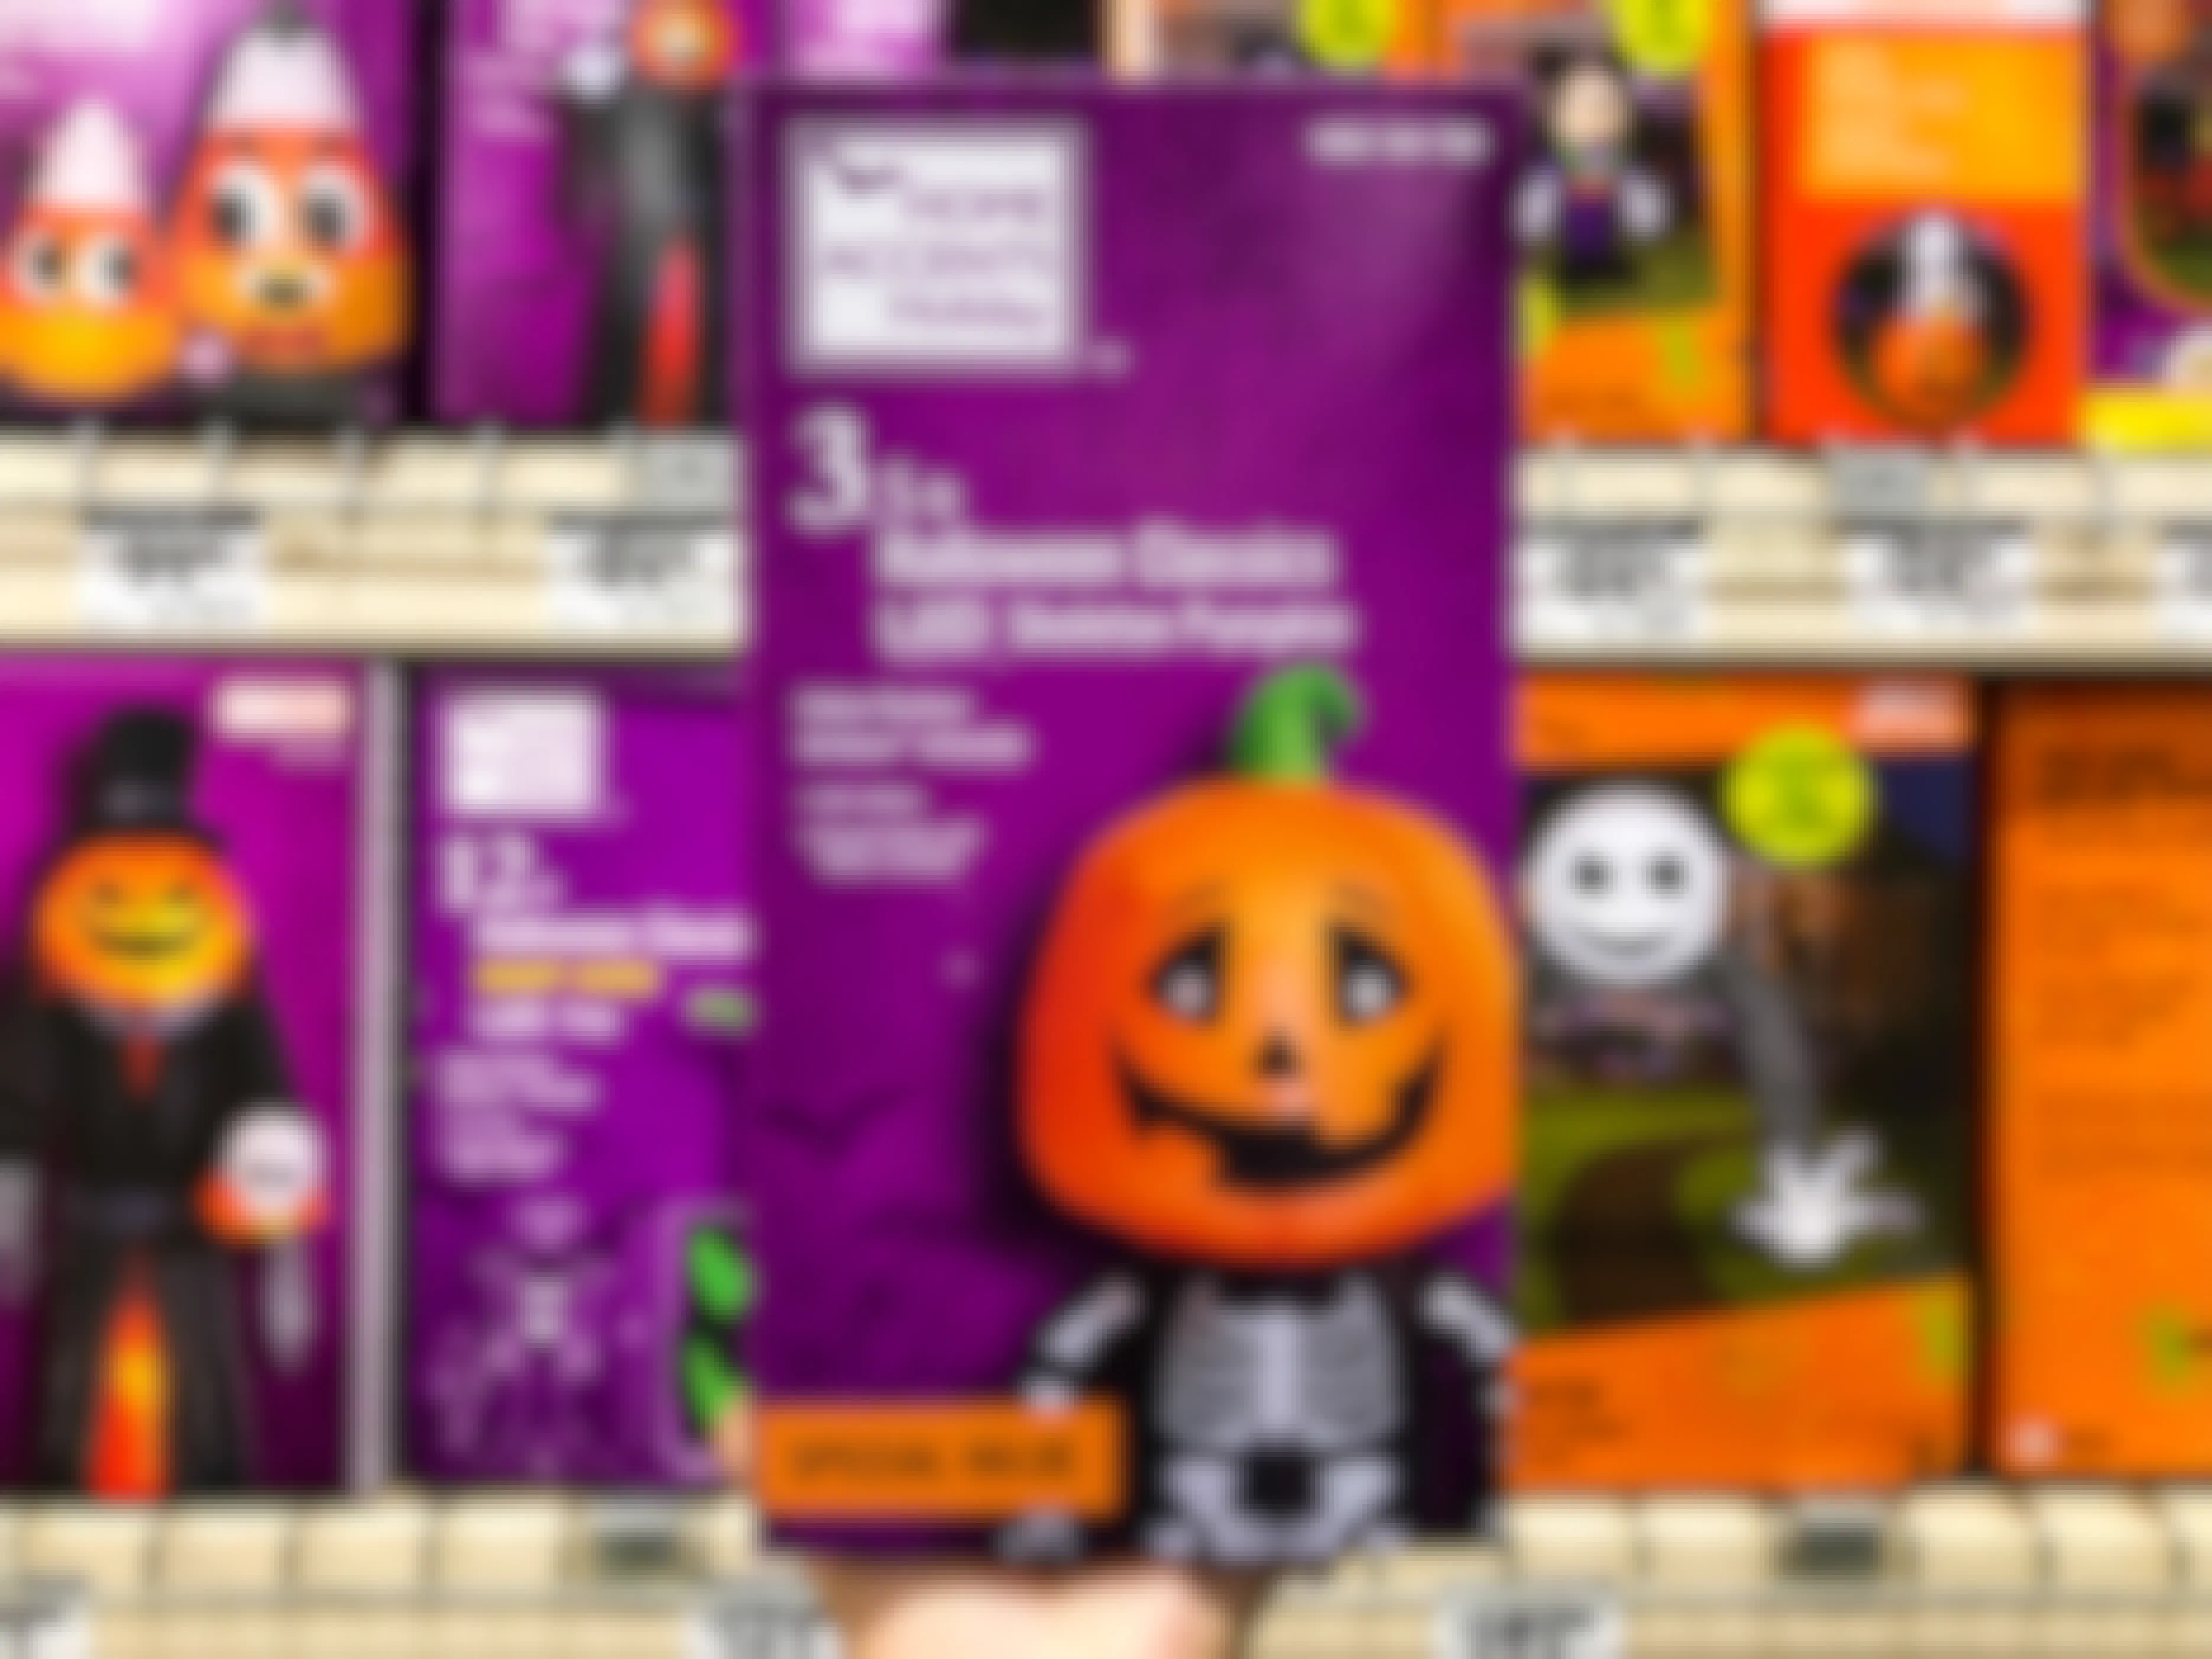 home depot led skeleton pumpkin halloween inflatable being held in front of shelving. 